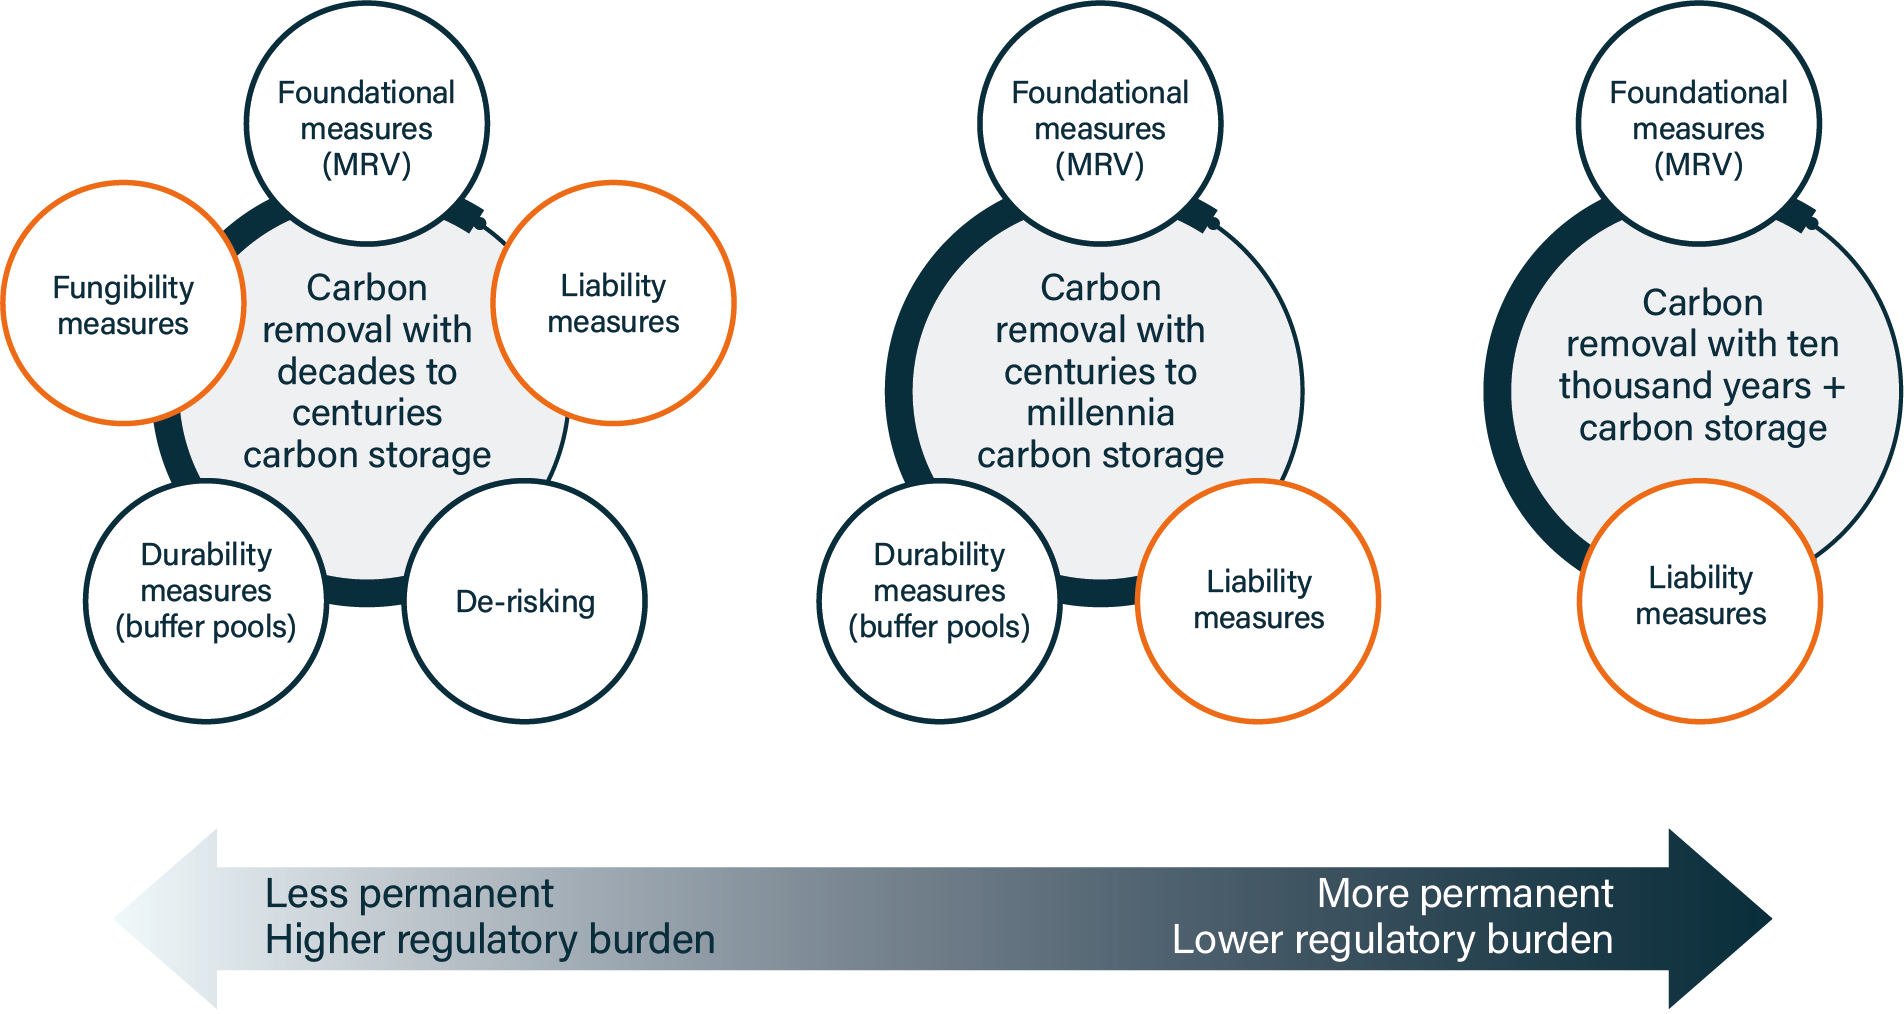 Figure 3: Three illustrative policy bundles - carbon removal with (1) decades to centuries carbon storage, (2) centuries to millennia carbon storage and (3) ten thousand years + carbon storage. Small blue circles are used to show measures that are currently employed in the Voluntary Carbon Market, such as MRV. Small orange circles are additional measures that might be used in lieu or as a complement in a compliance carbon market, such as fungibility and liability.